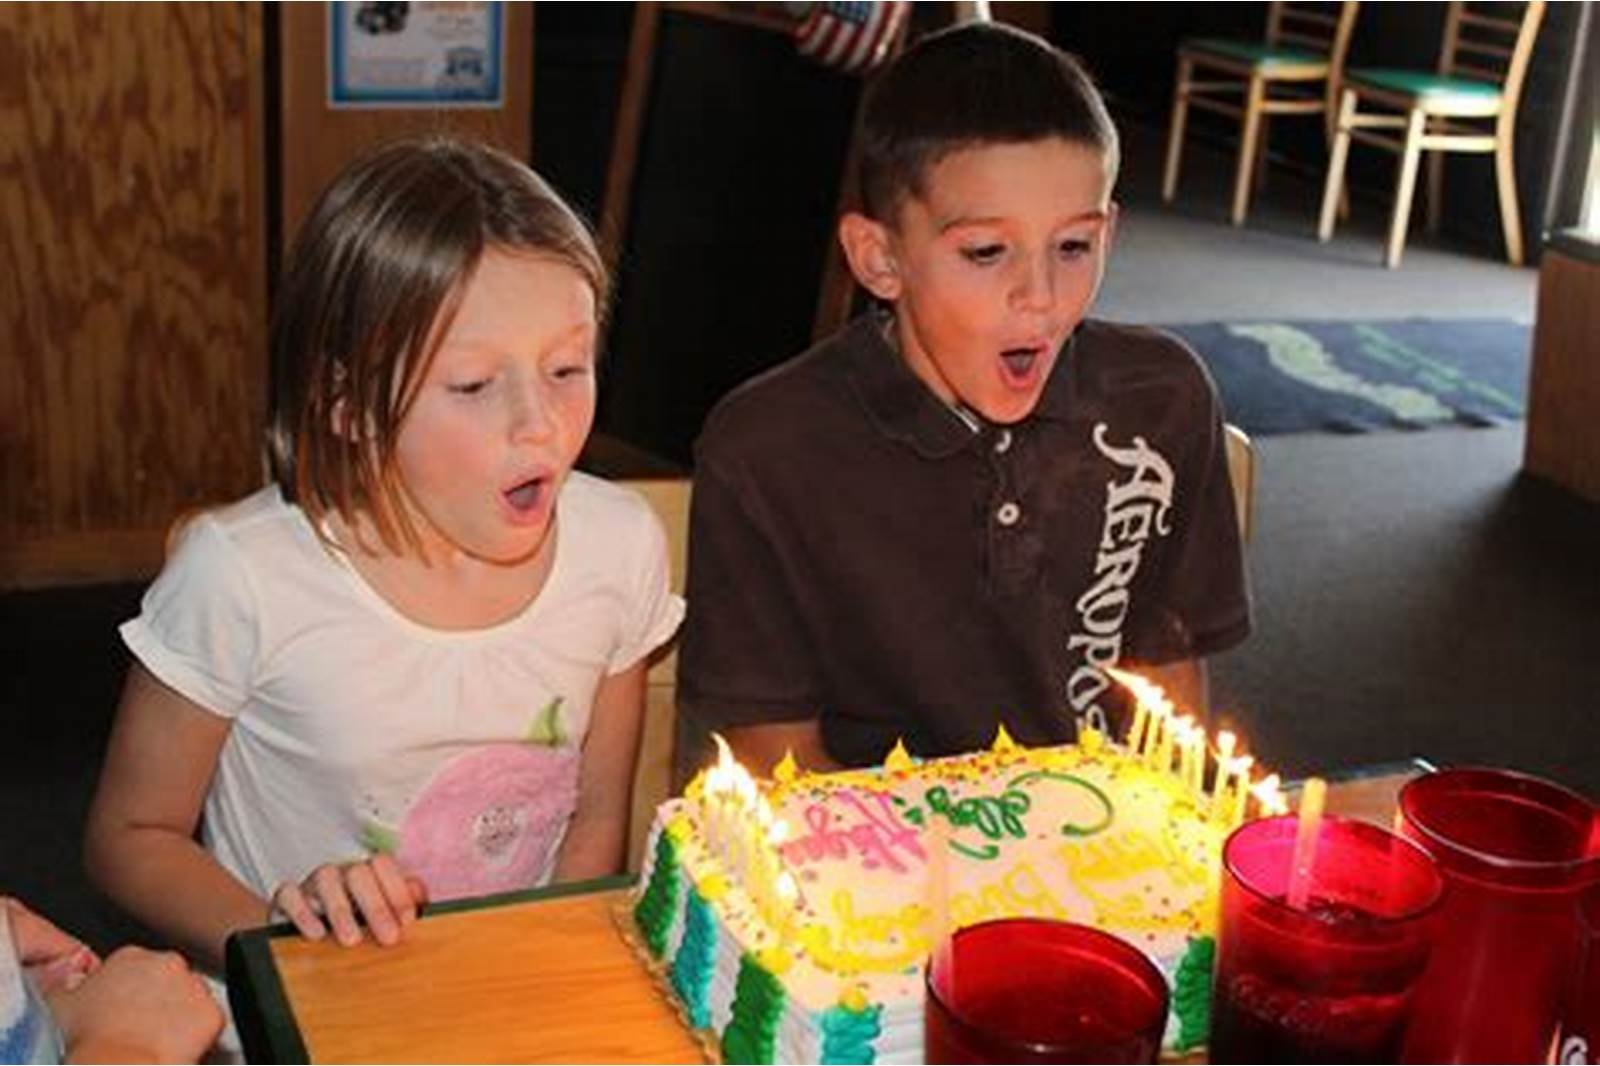 8 Reasons Why Children’s Birthday Parties Are So Important